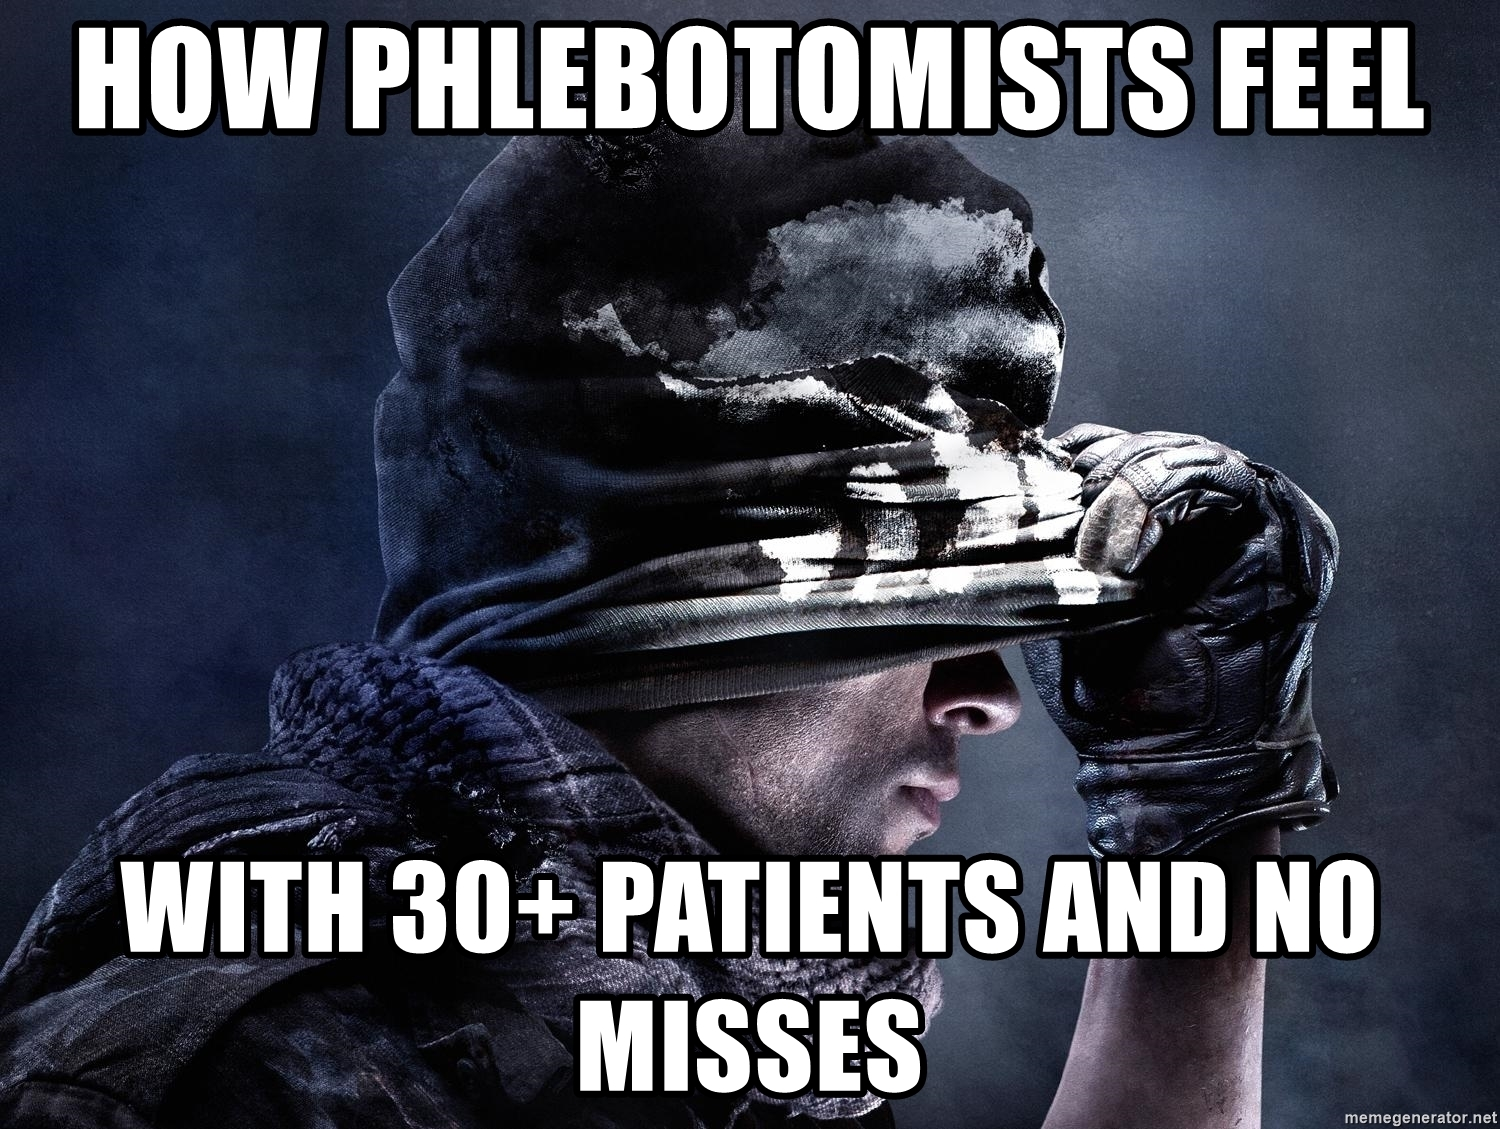 How phlebotomists feel with 30+ patients and no misses.